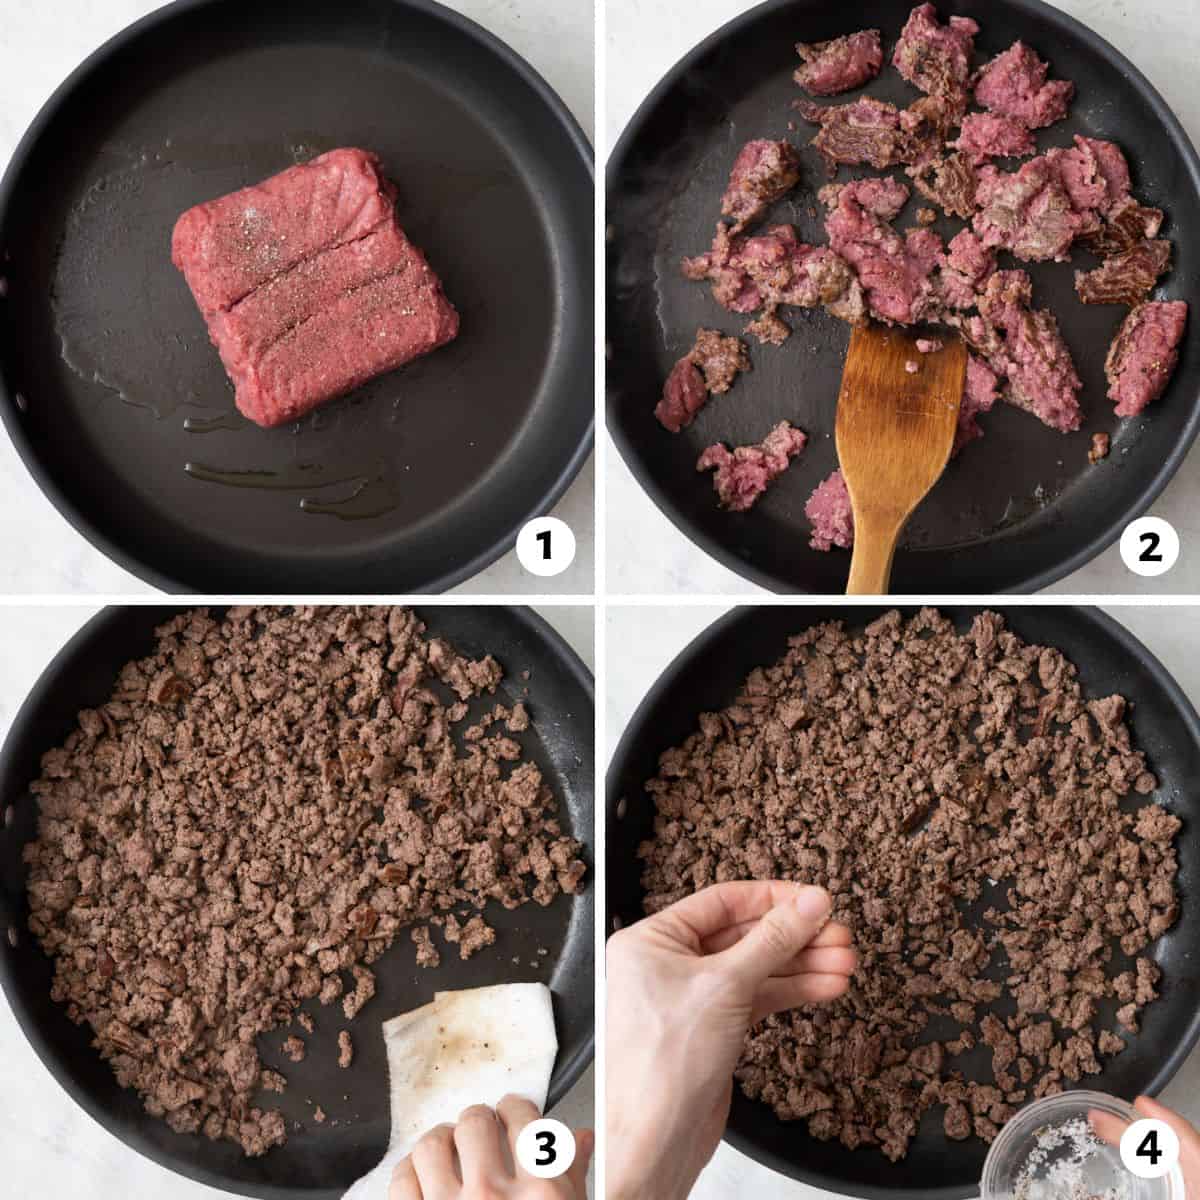 4 image collage making recipe: 1- raw ground beef in an oiled skillet, 2- spatula breaking up partially cooked beef, 3- beef after cooked with a paper towel soaking up the grease from side, 4- sprinkling salt on top.